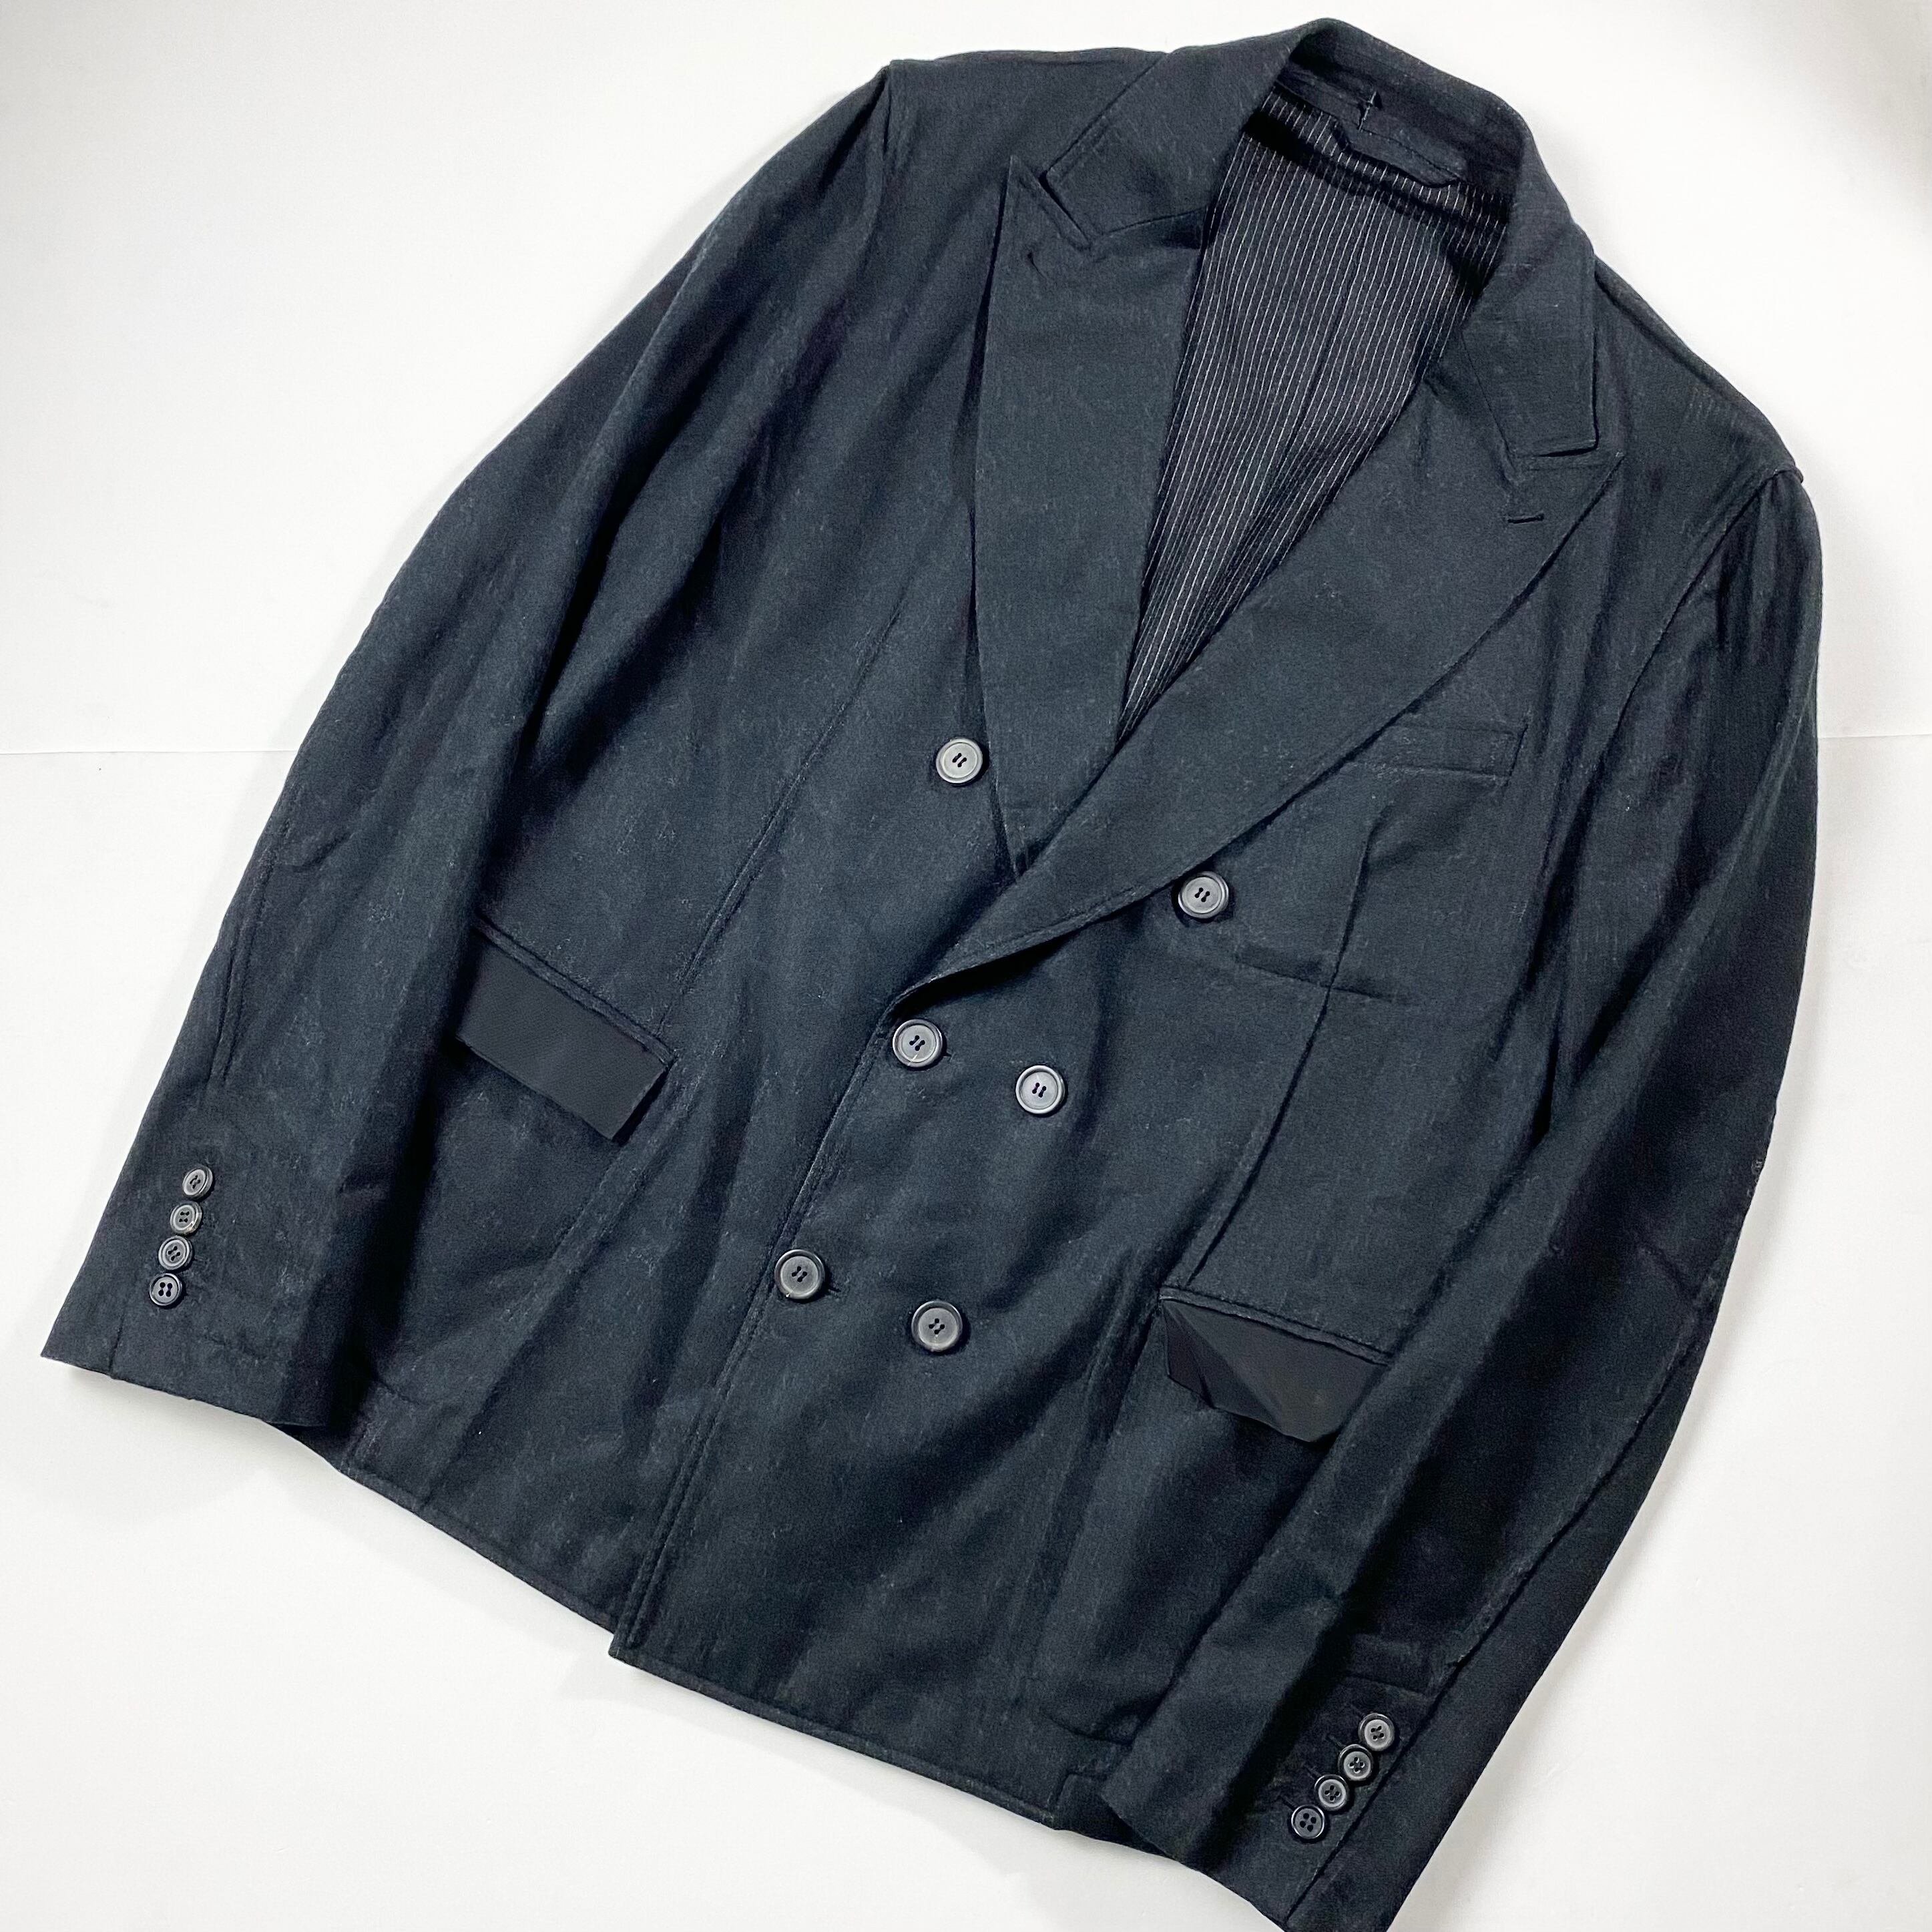 LANVIN double breasted tailored jacket by Lucas Ossendrijver 